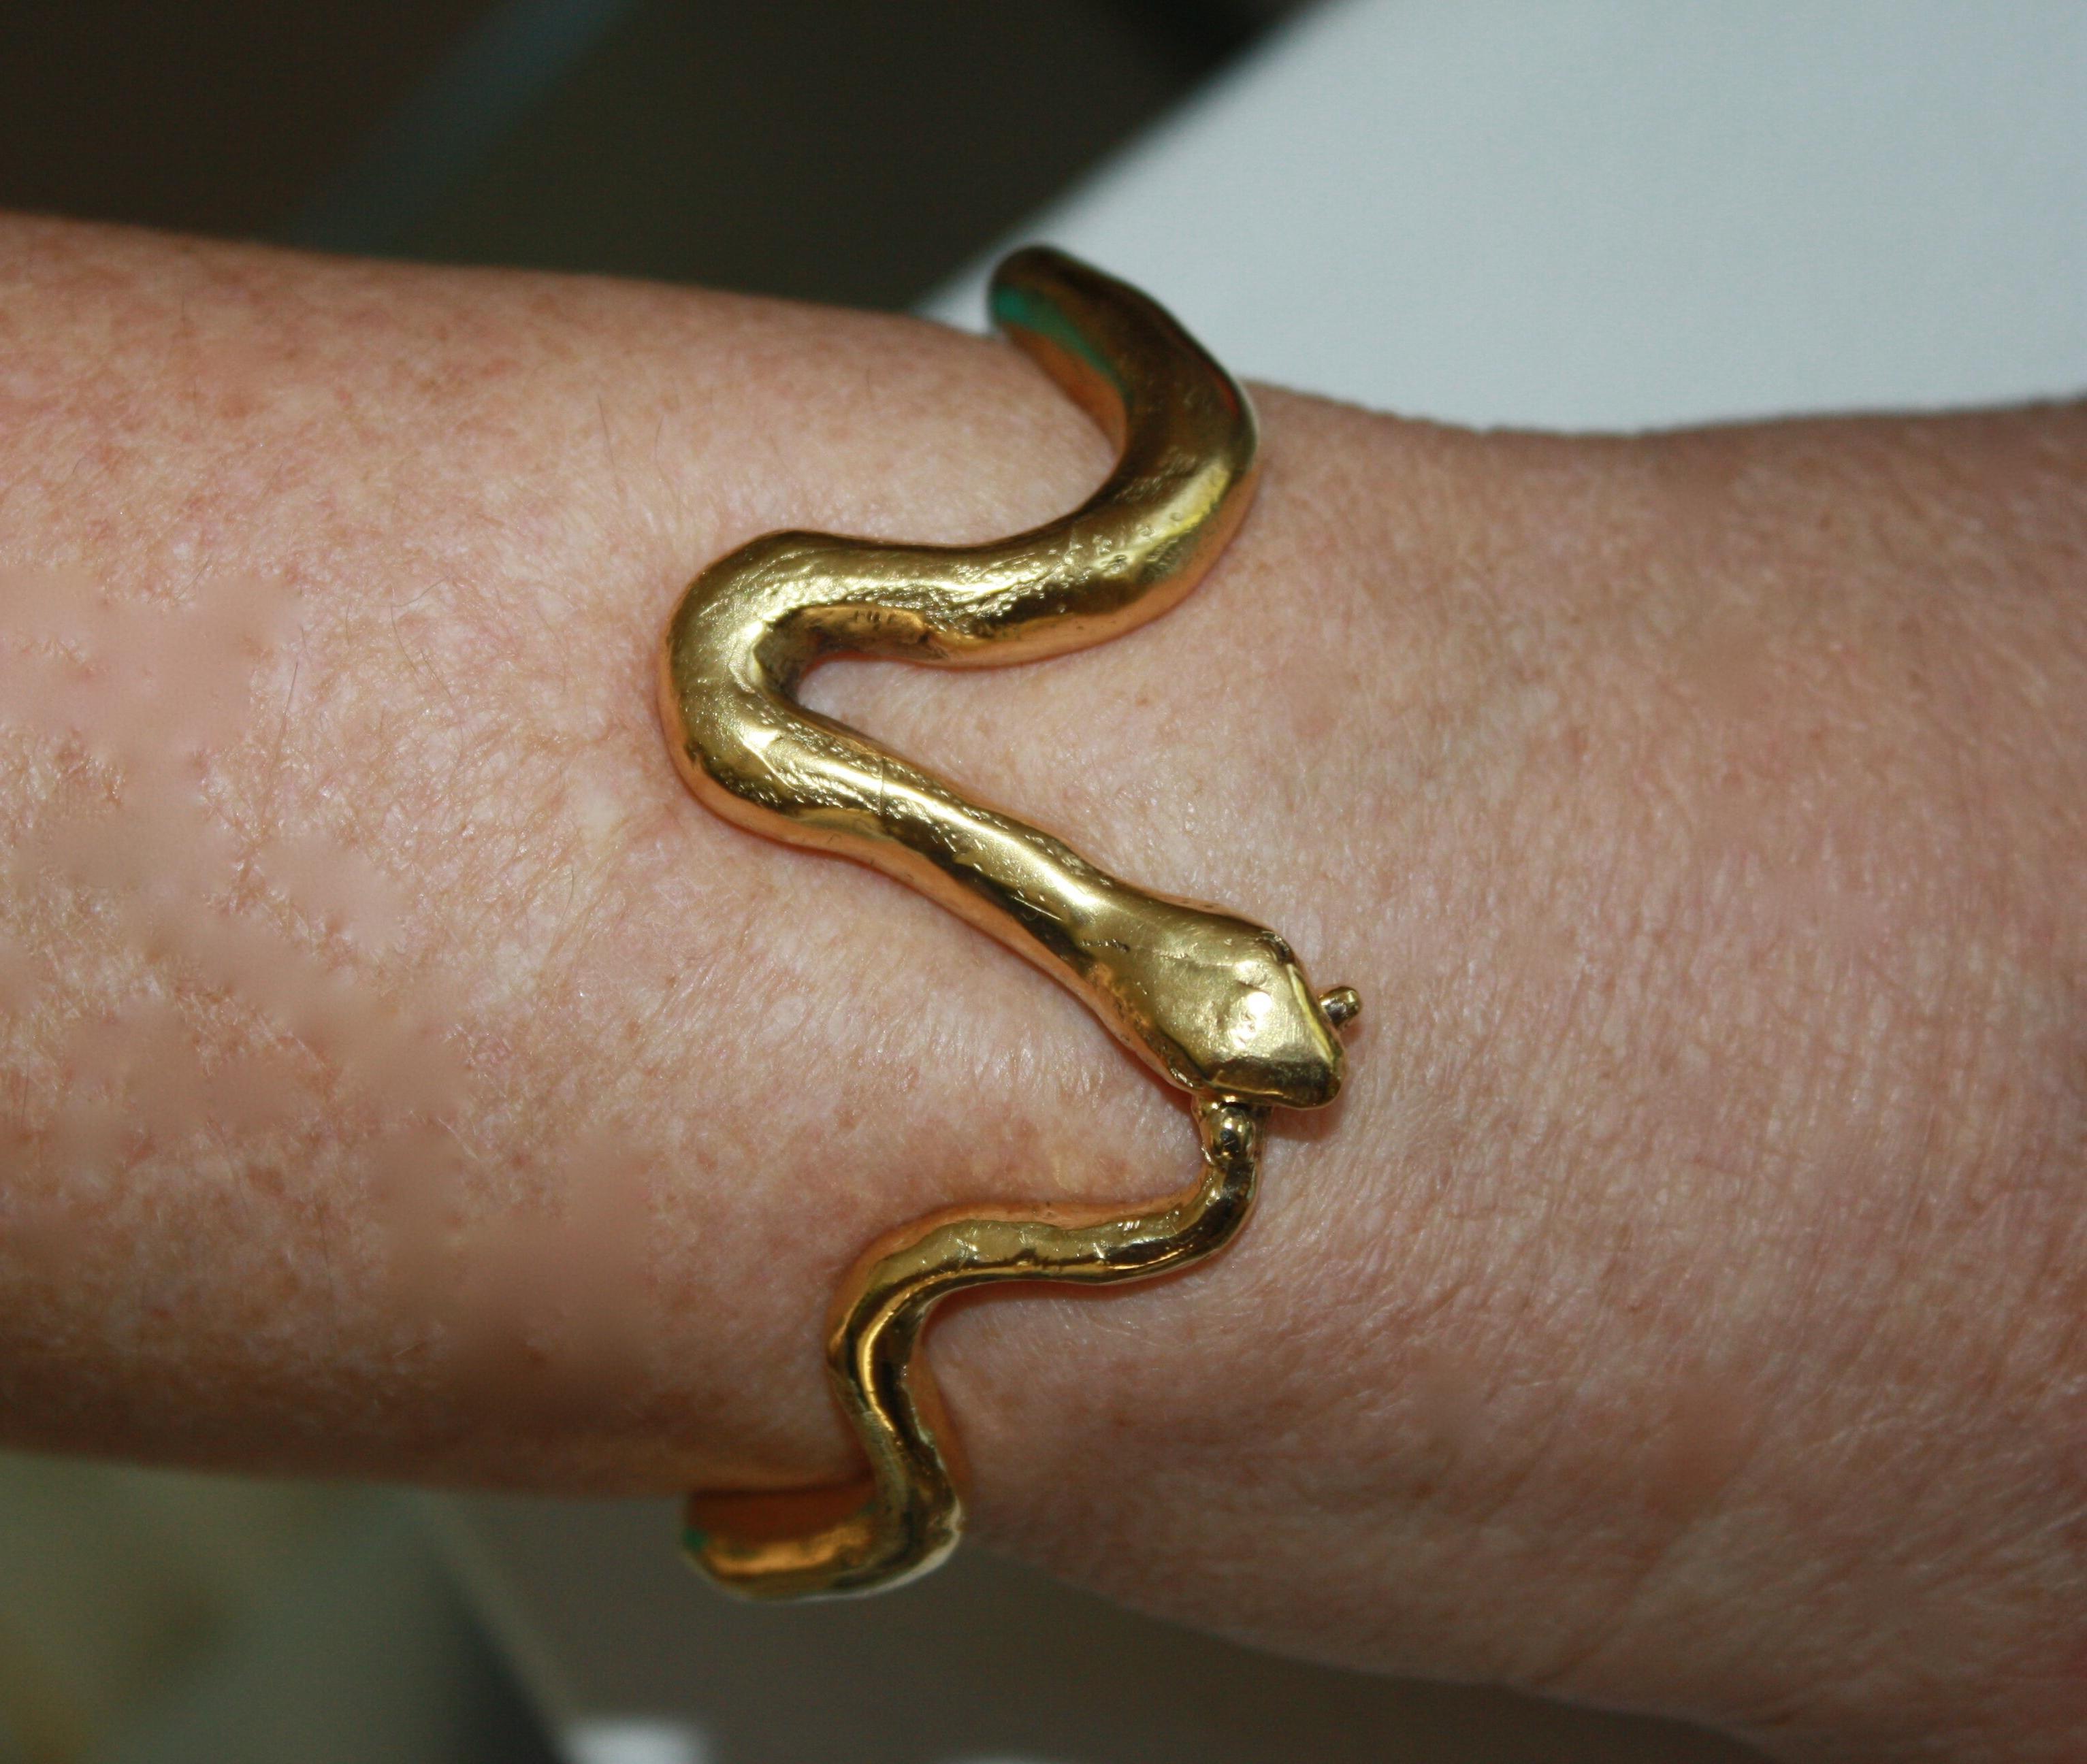 Snake motif bracelet - part of a limited edition collaboration between Harumi Klossowska de Rolaheart and the House of Goossens Paris. 

The NY Times recently wrote an article entitled 